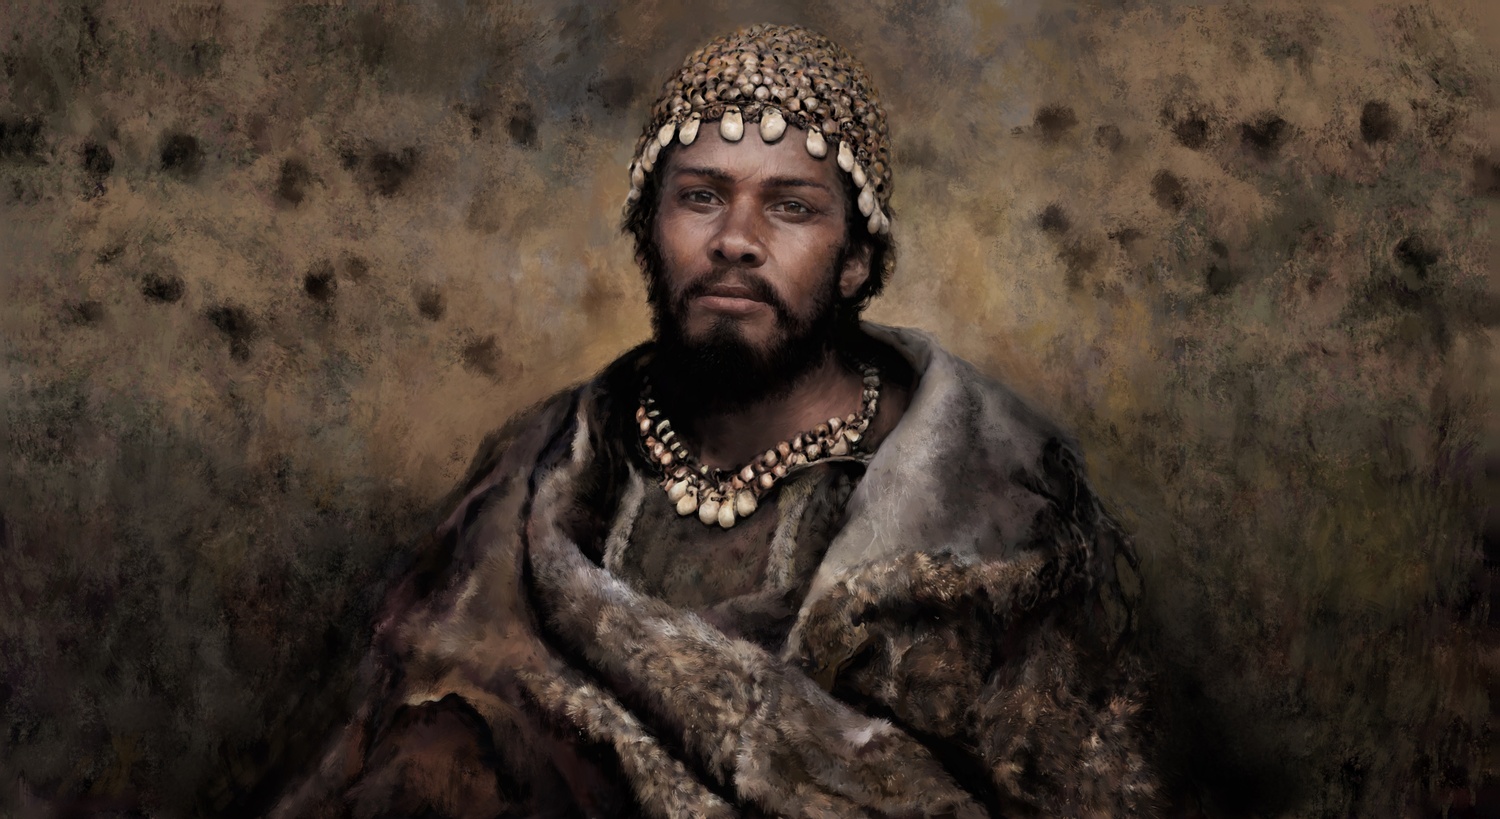 Reconstruction of a hunter-gatherer of the Gravettian culture (32,000 to 24,000 years ago), inspired by the archaeological finds at the Arene Candide site (Italy).